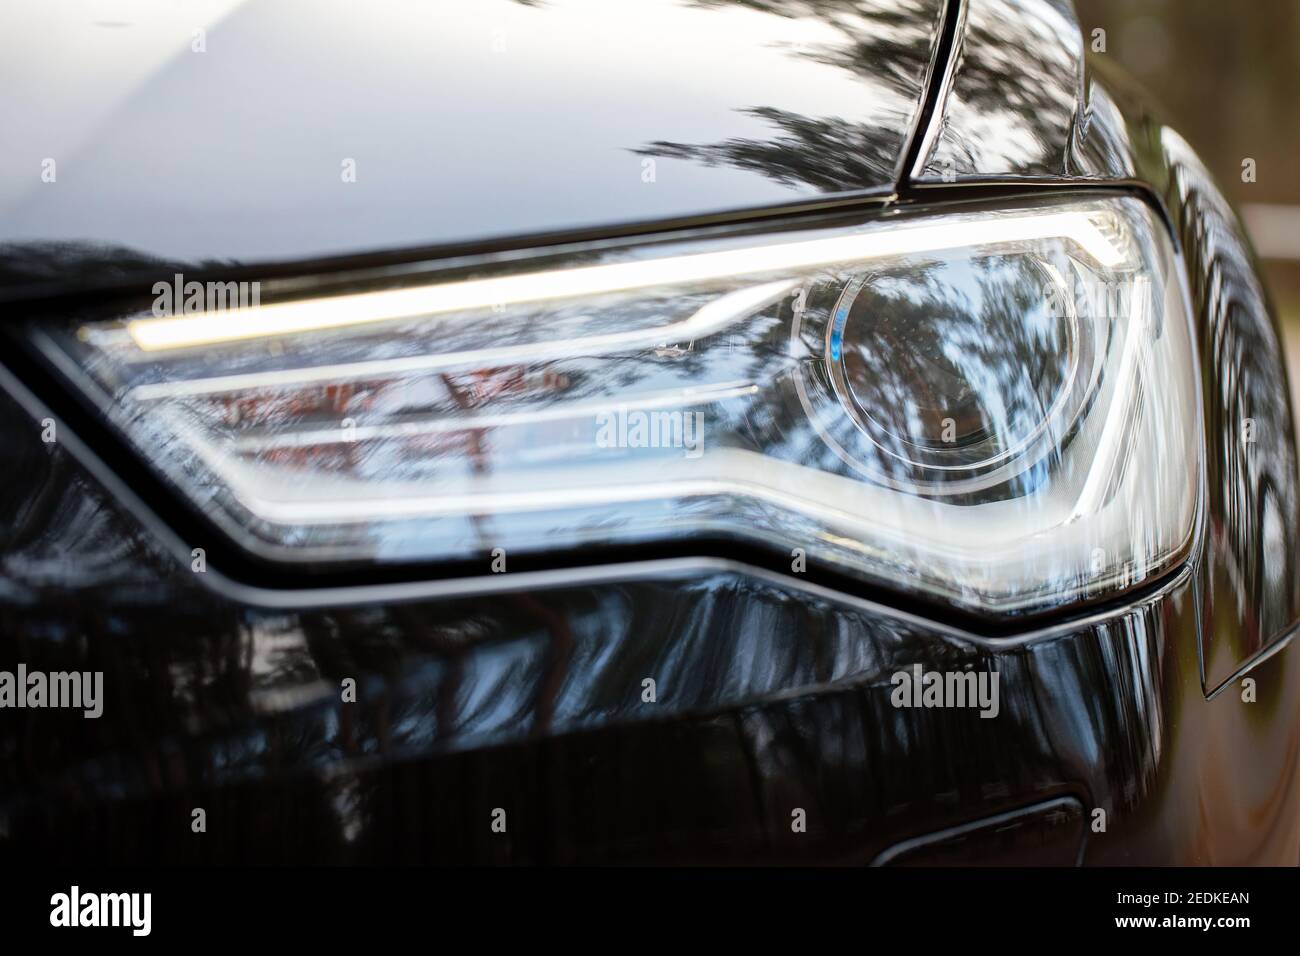 GRODNO, BELARUS - DECEMBER 2019: Audi A6 4G C7 Luxury Black car parts left  front headlight and fog light with Running Headlamps turned on closeup  Stock Photo - Alamy